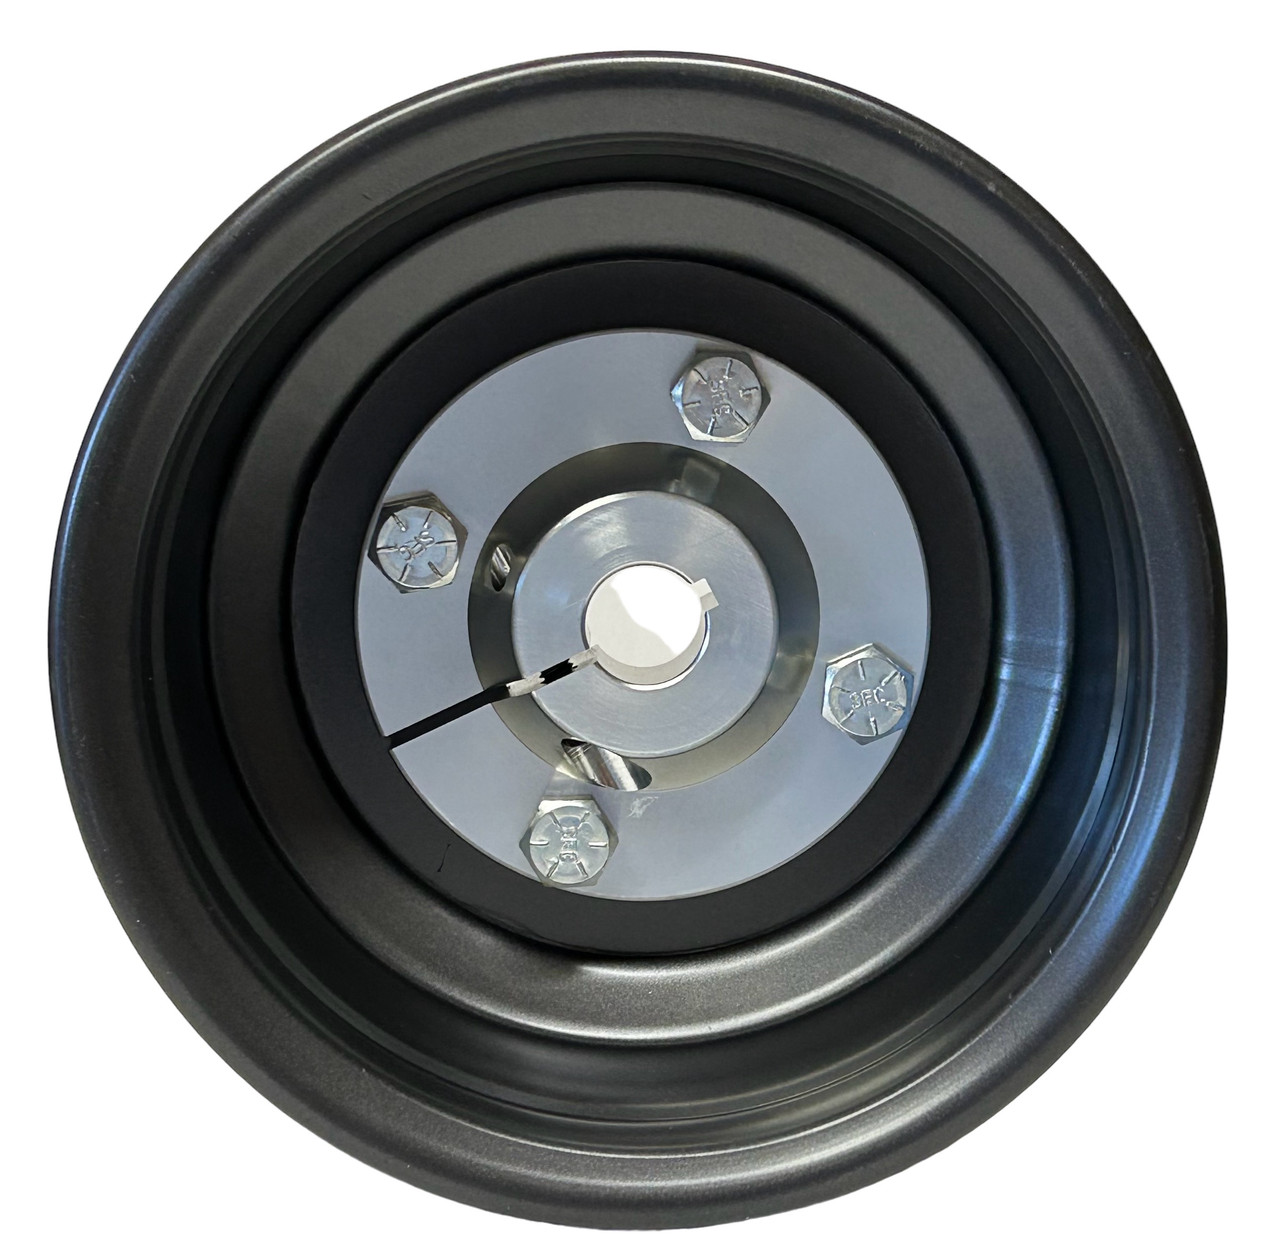 8 x 8 Aluminum Wheel and 1 inch hub for 1 inch Axles.  